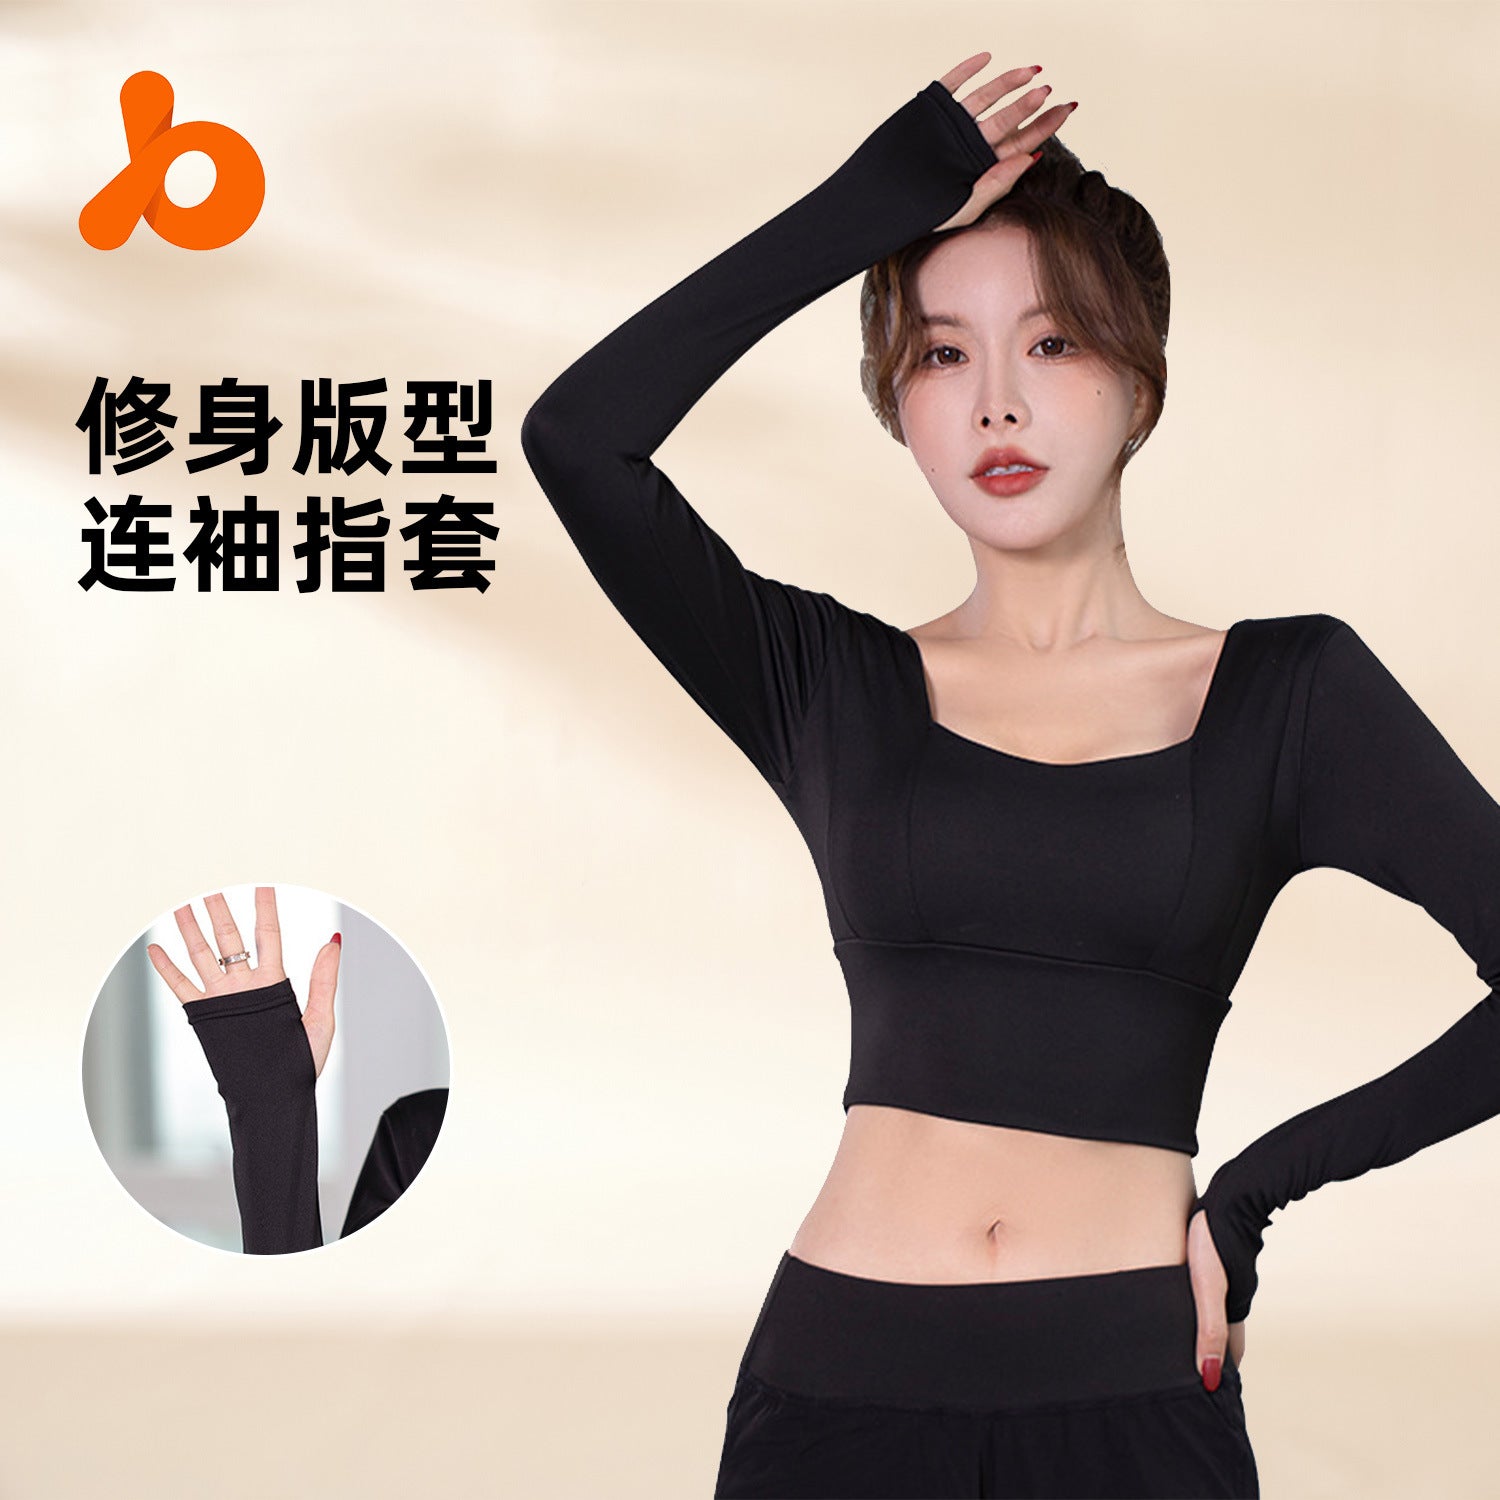 Juyitang yoga wear women's long sleeves with chest pads quick-drying crop top gym clothes